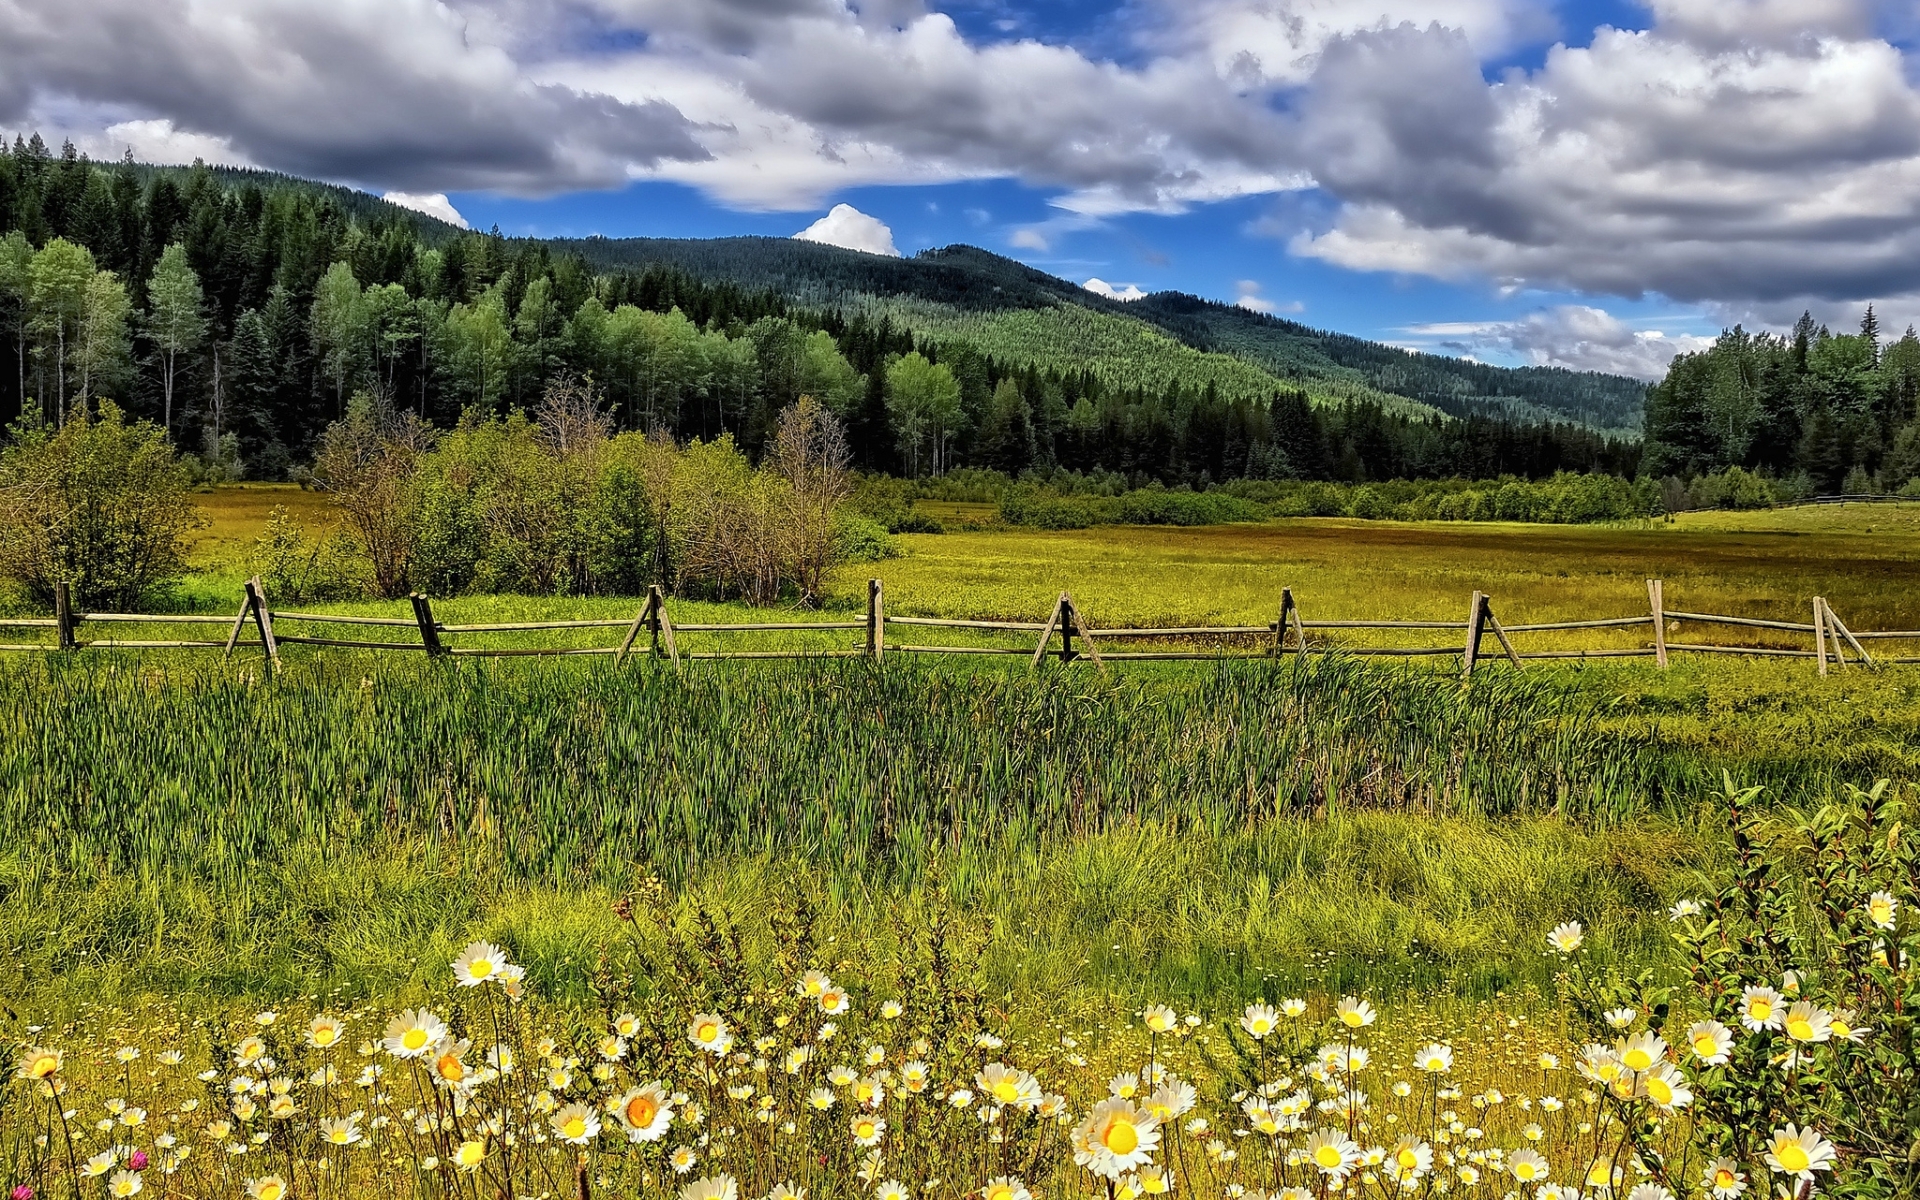 flowers, Meadow, Fence, Rustic, Grass, Mountains, Hills, Trees, Forest, Woods, Sky, Clouds Wallpaper